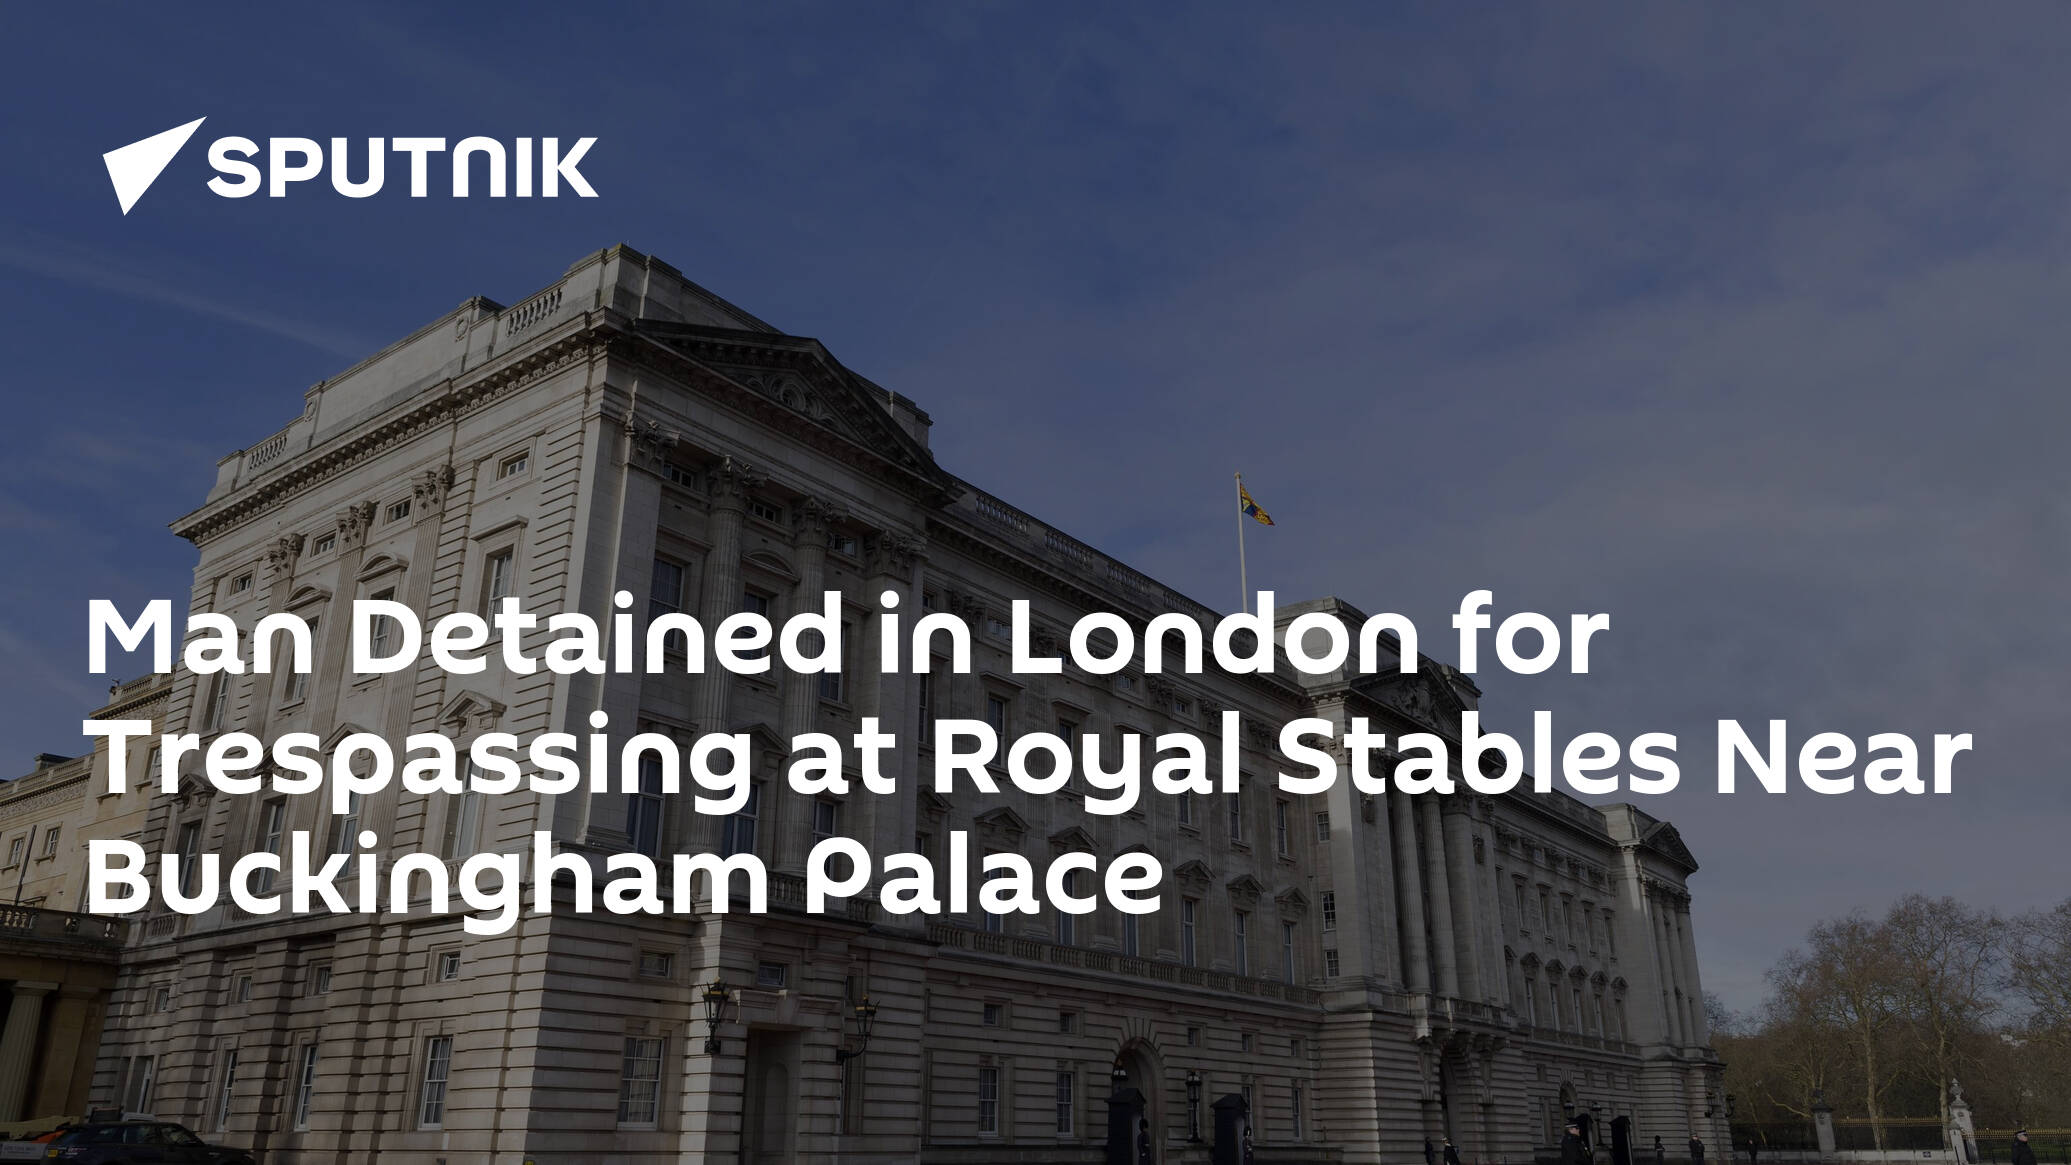 Man Detained in London for Trespassing at Royal Stables Near Buckingham Palace